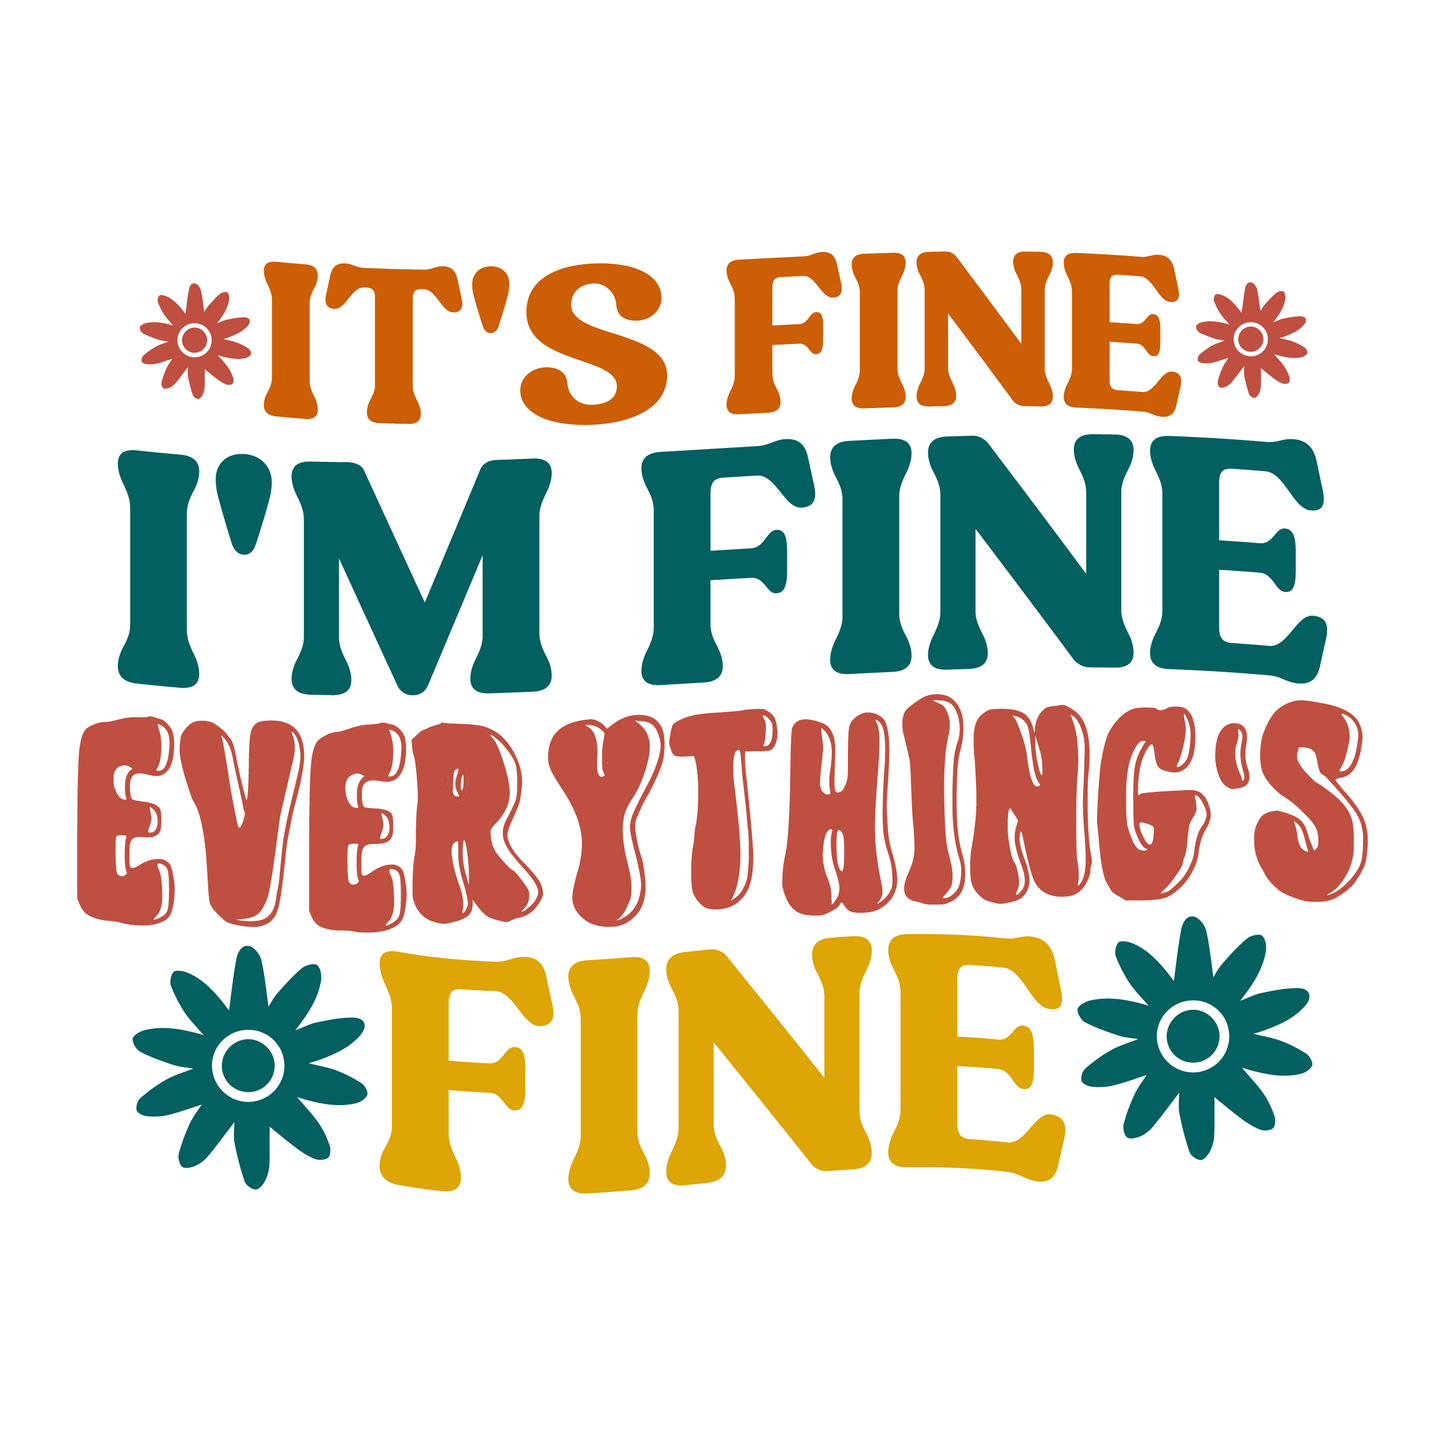 Inspirational Quote "It's Fine I'm Fine Everything's Fine" Motivational Sticker Vinyl Decal Motivation Stickers- 5" Vinyl Sticker Waterproof